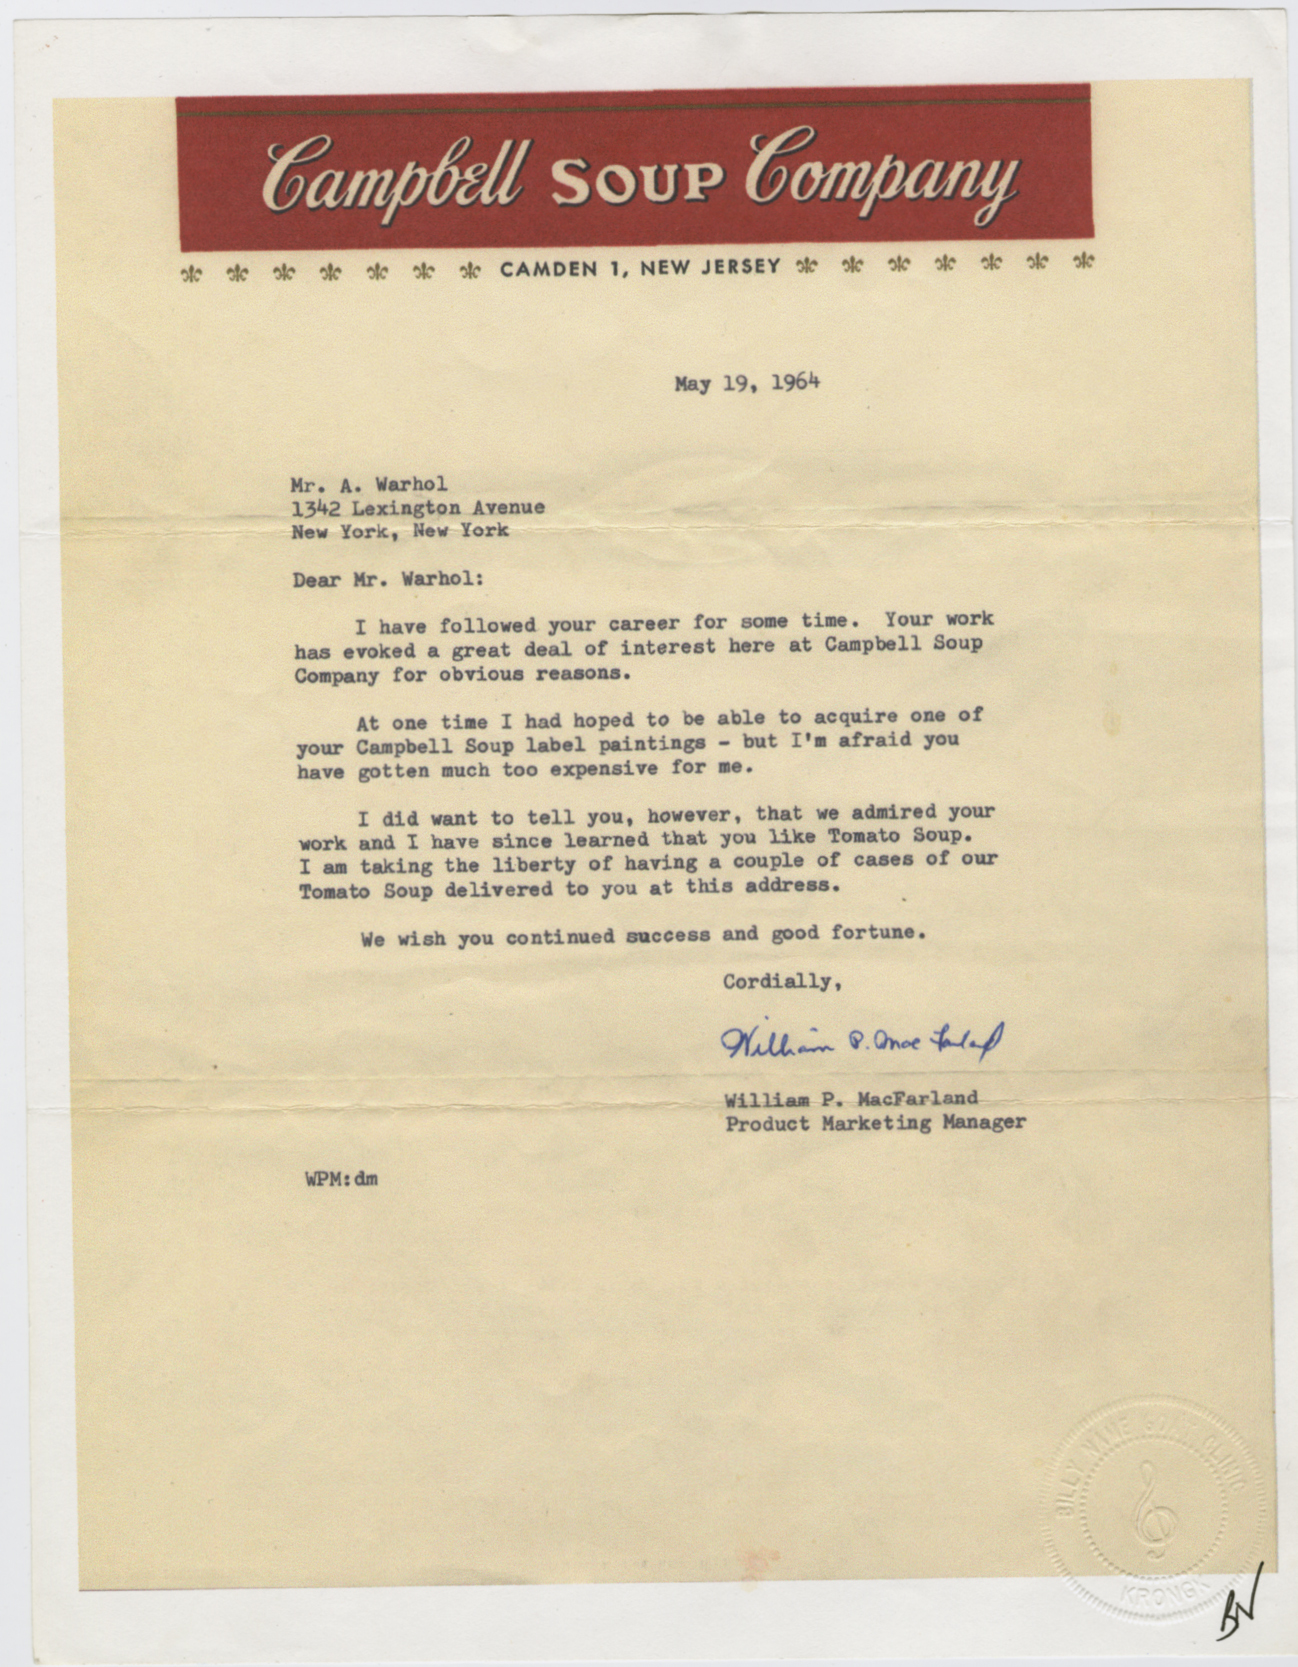 Letters in the collection include one from a marketing manager at Campbell Soup Co., expressing admiration for Warhol’s work, out of his price range as it may be.